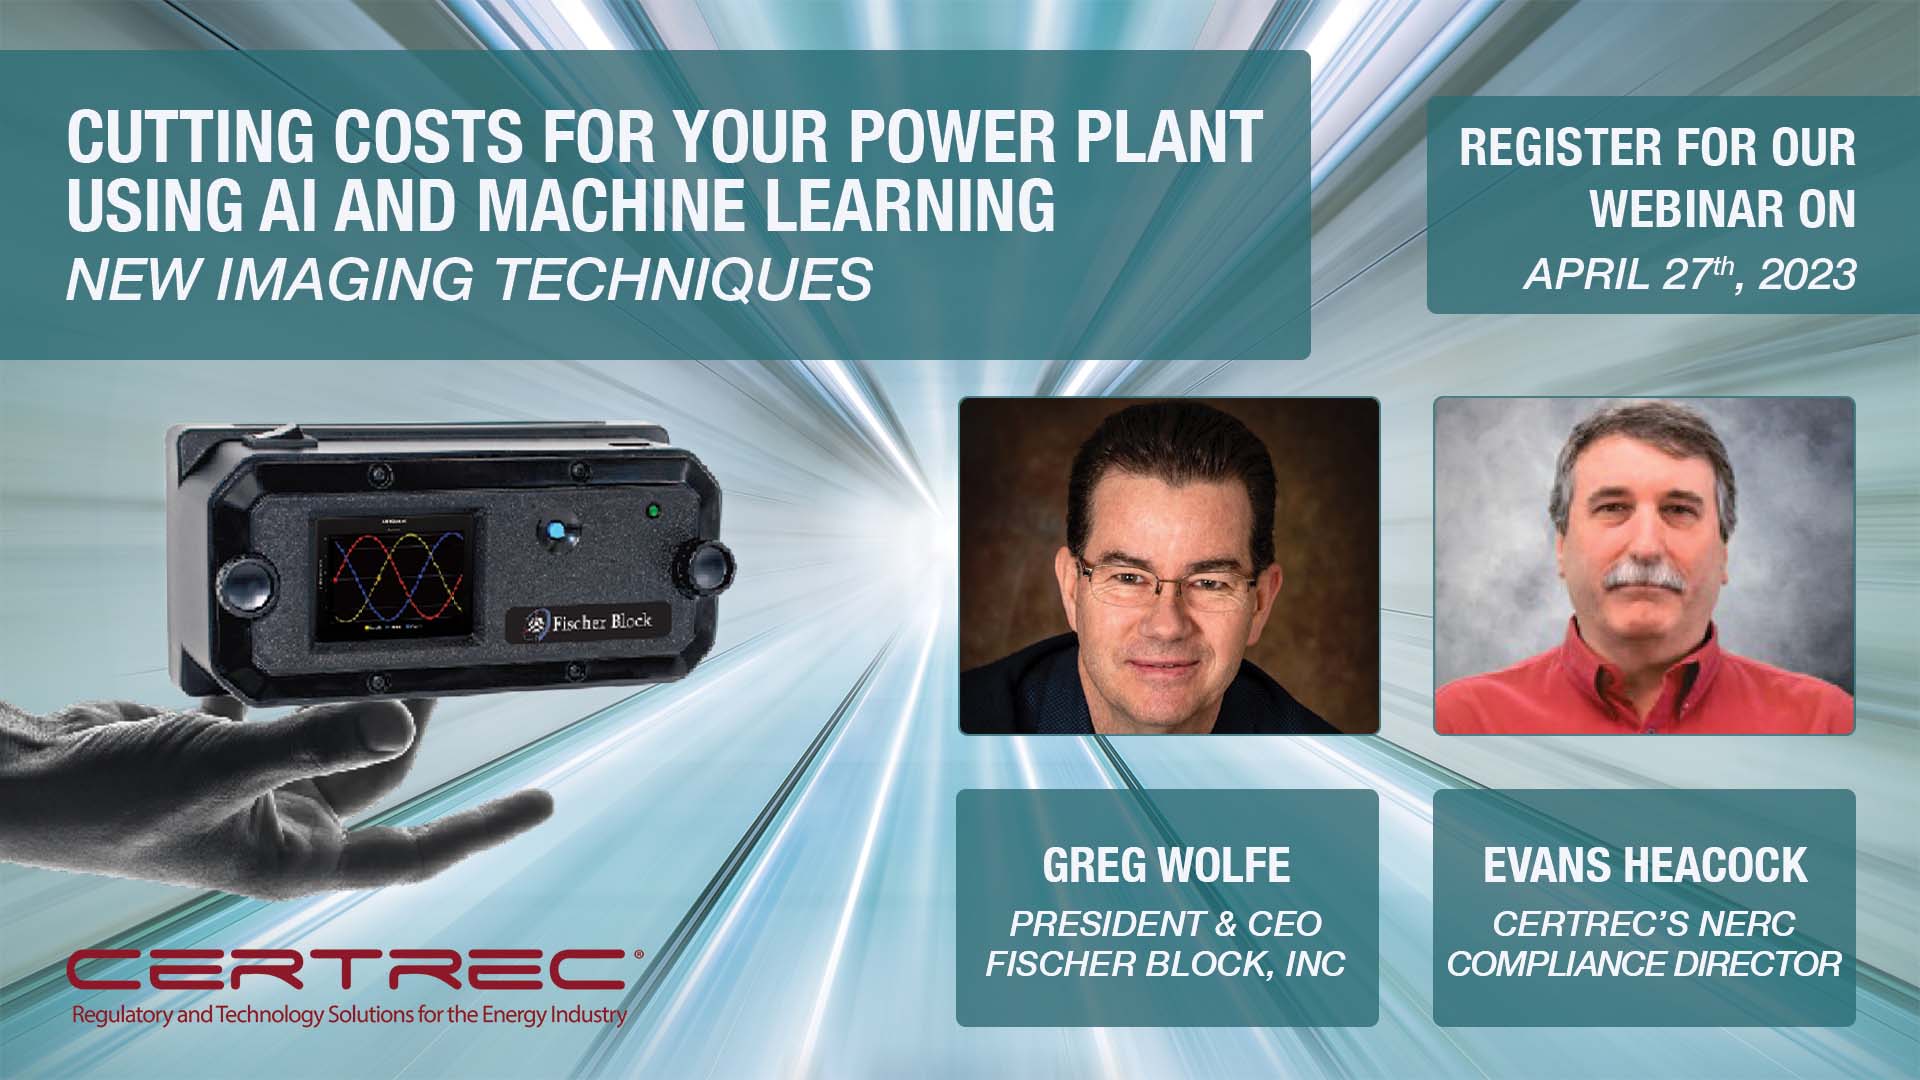 20230427 - Cutting Costs for Your Power Plant Using AI and Machine Learning v2.0 - Certrec